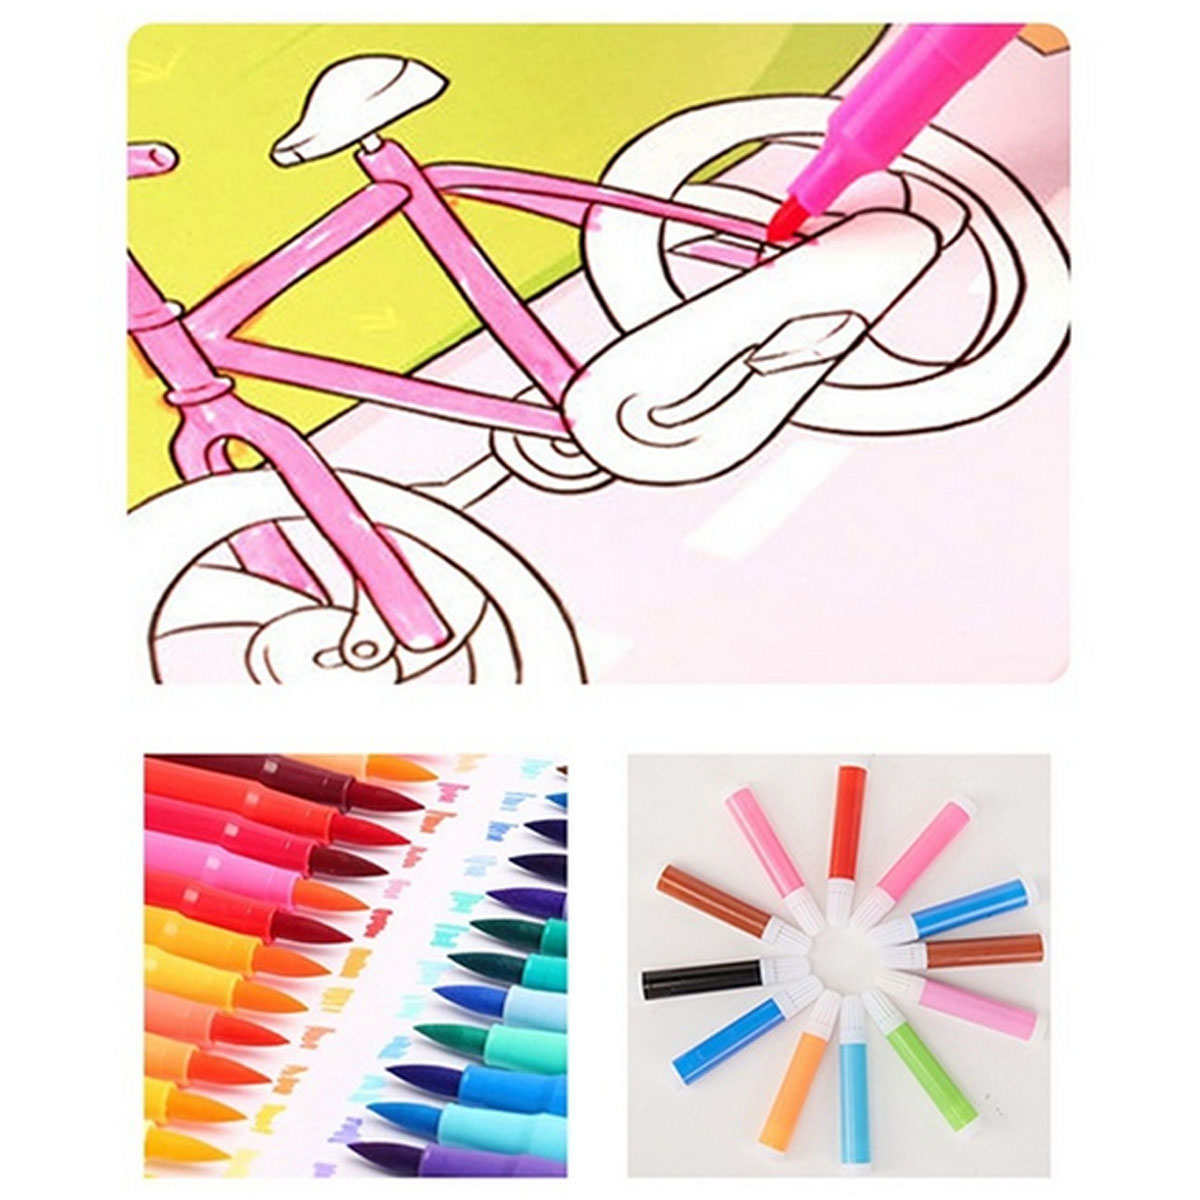 150Pcs Children Drawing WaterColor Pen Kids Art Set Crayon Oil Pastel Painting Tool Art supplies stationery Kit for Student Gift—5